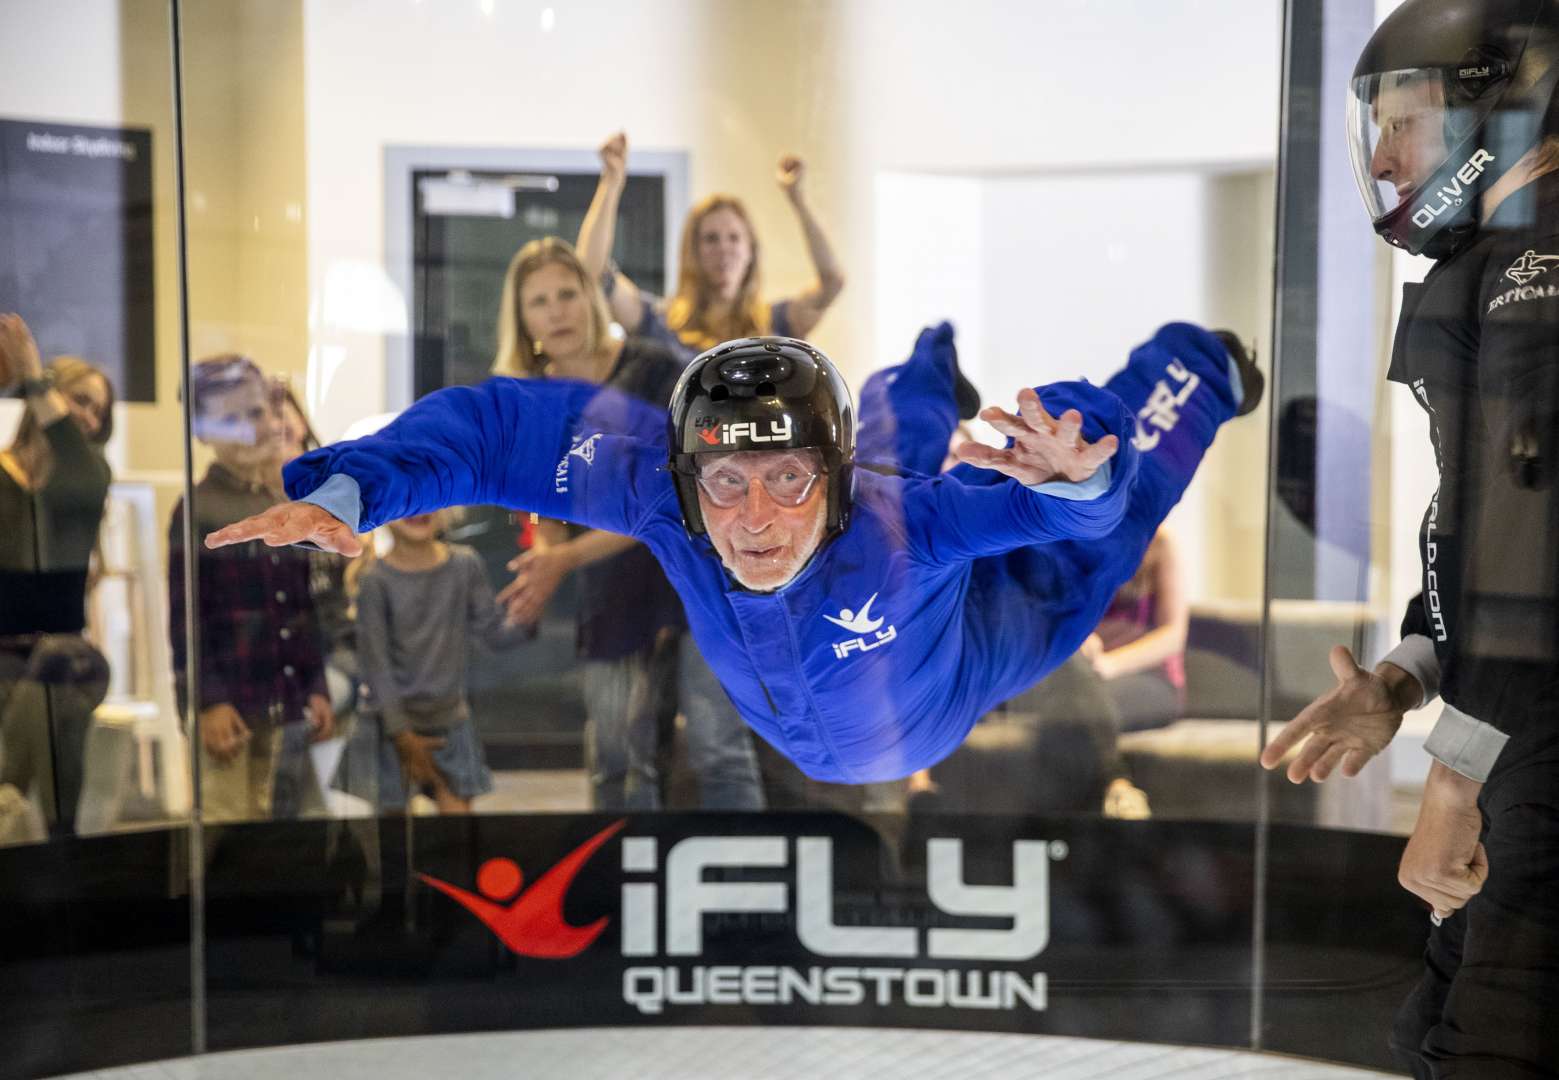 Experience skydiving indoor with iFly Queenstown